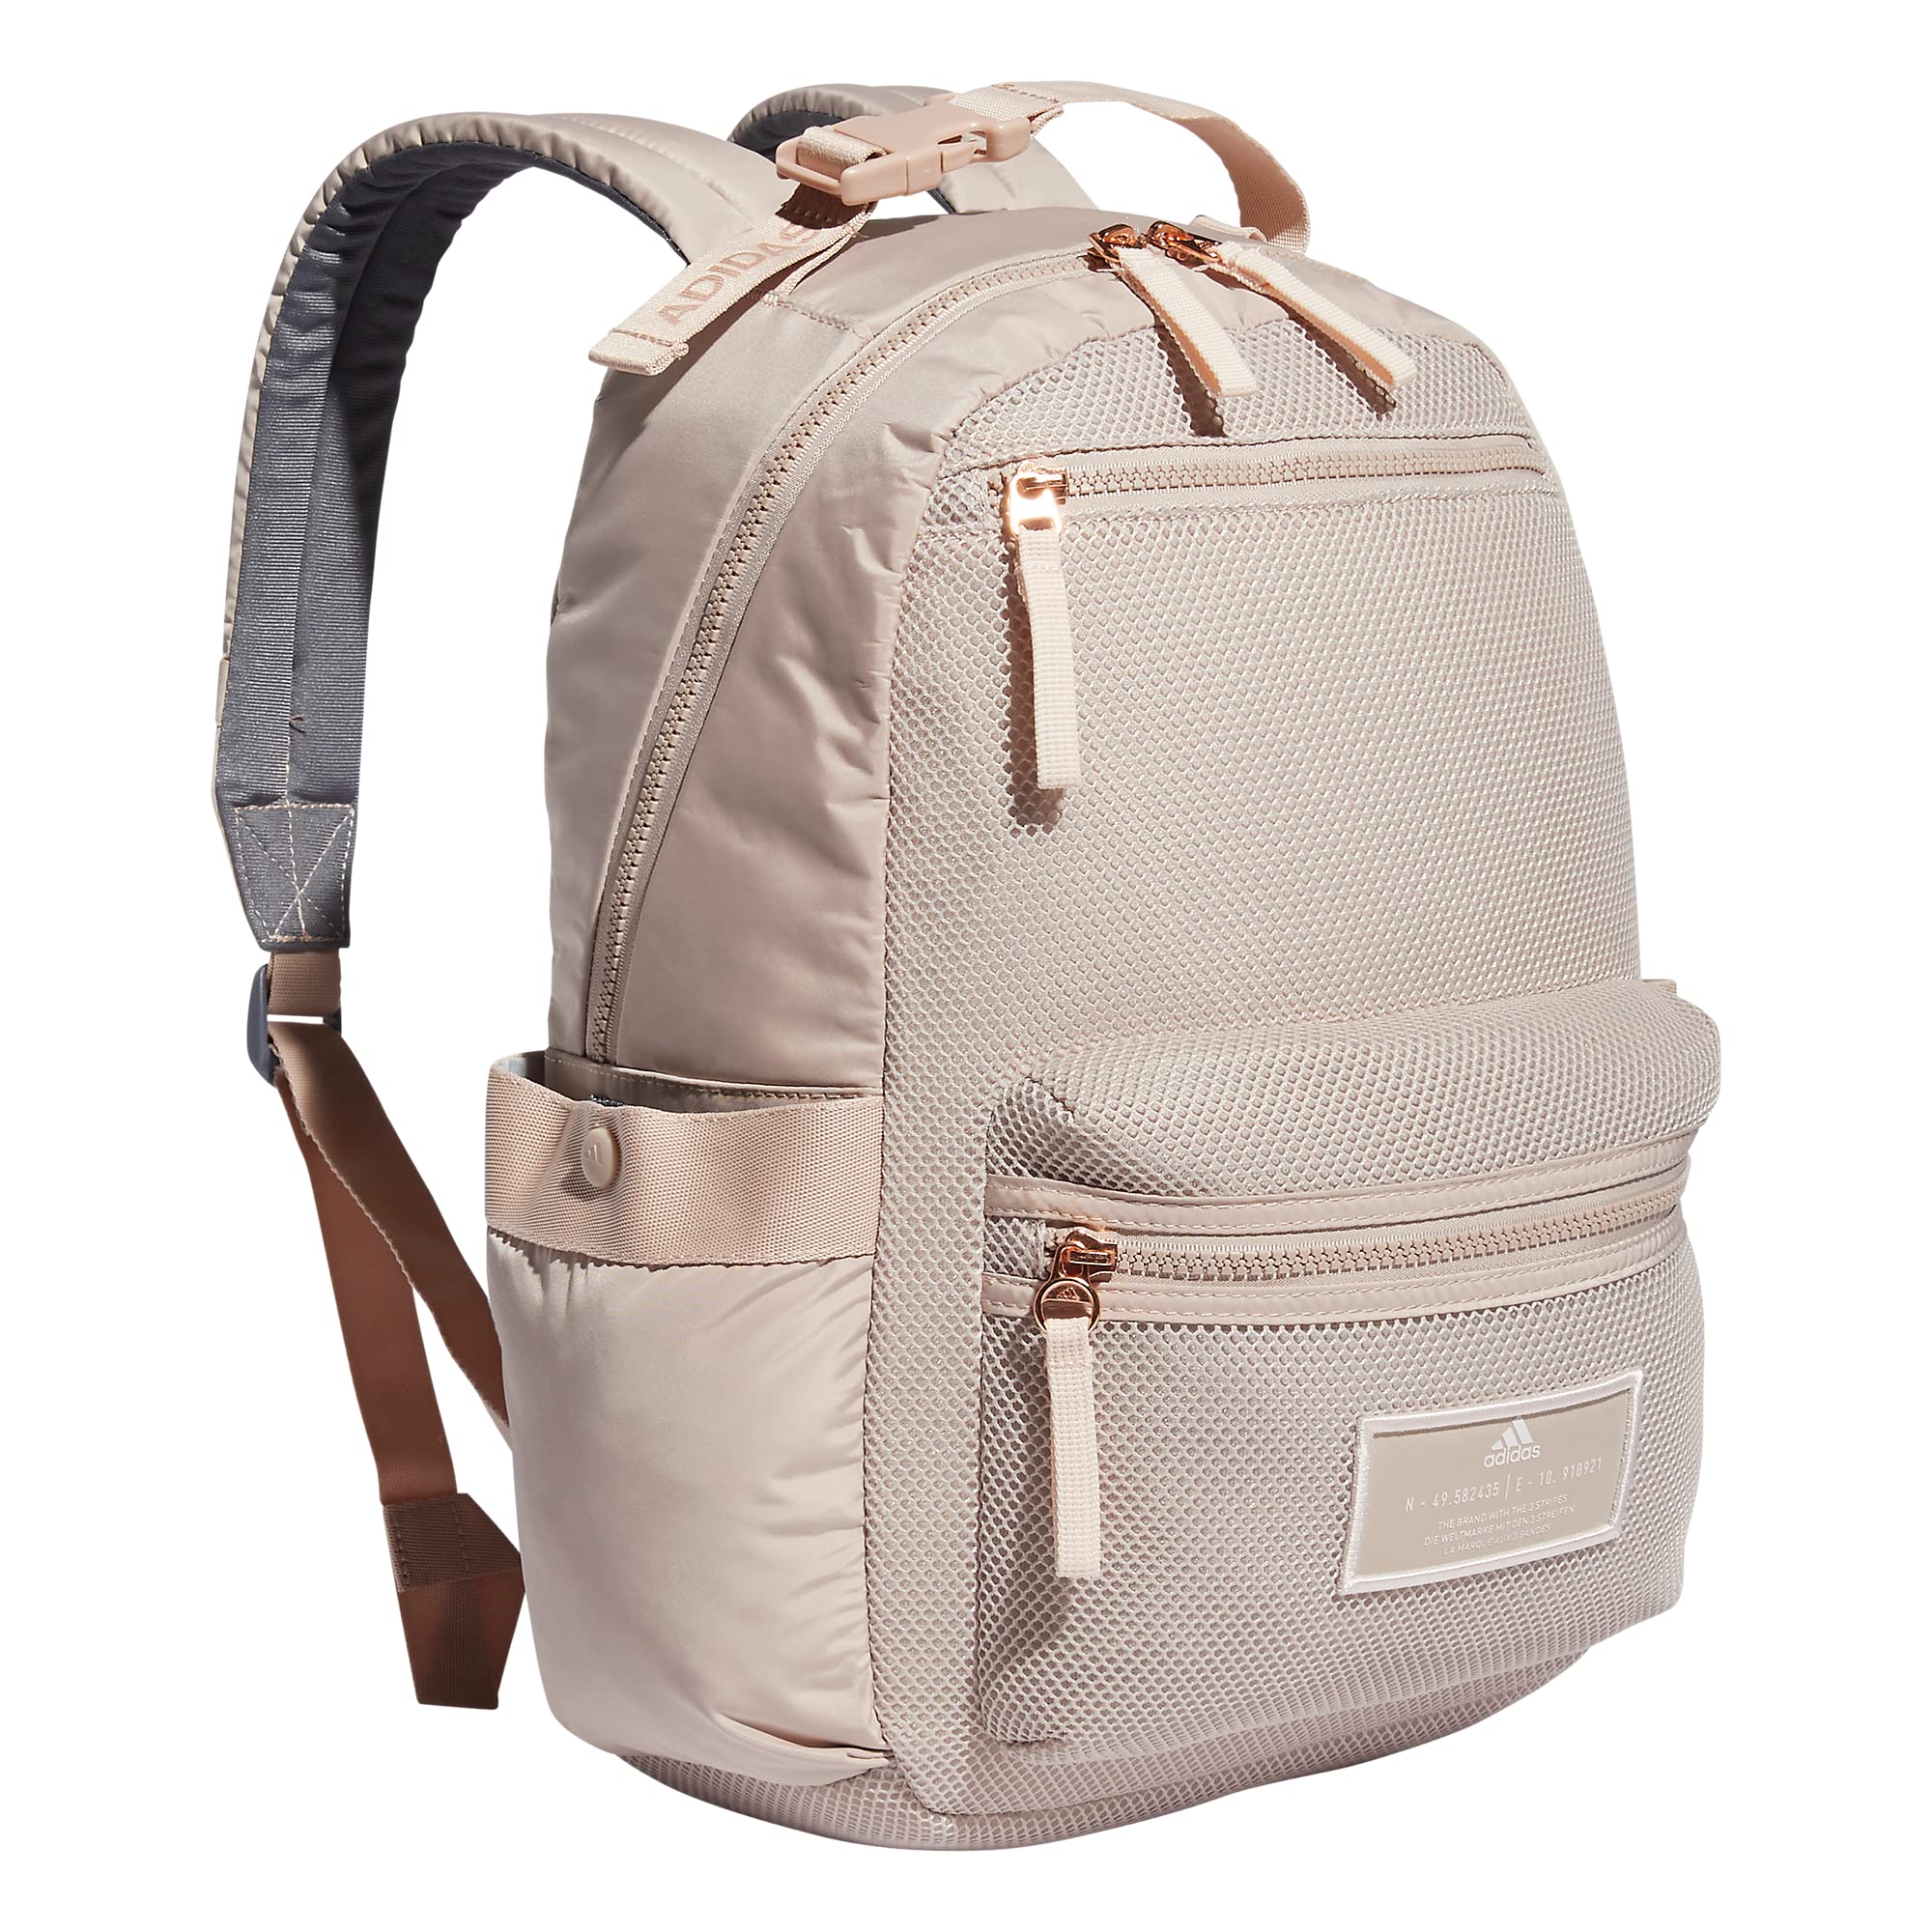 adidas Women's VFA 4 Backpack, Wonder Taupe Beige, One Size